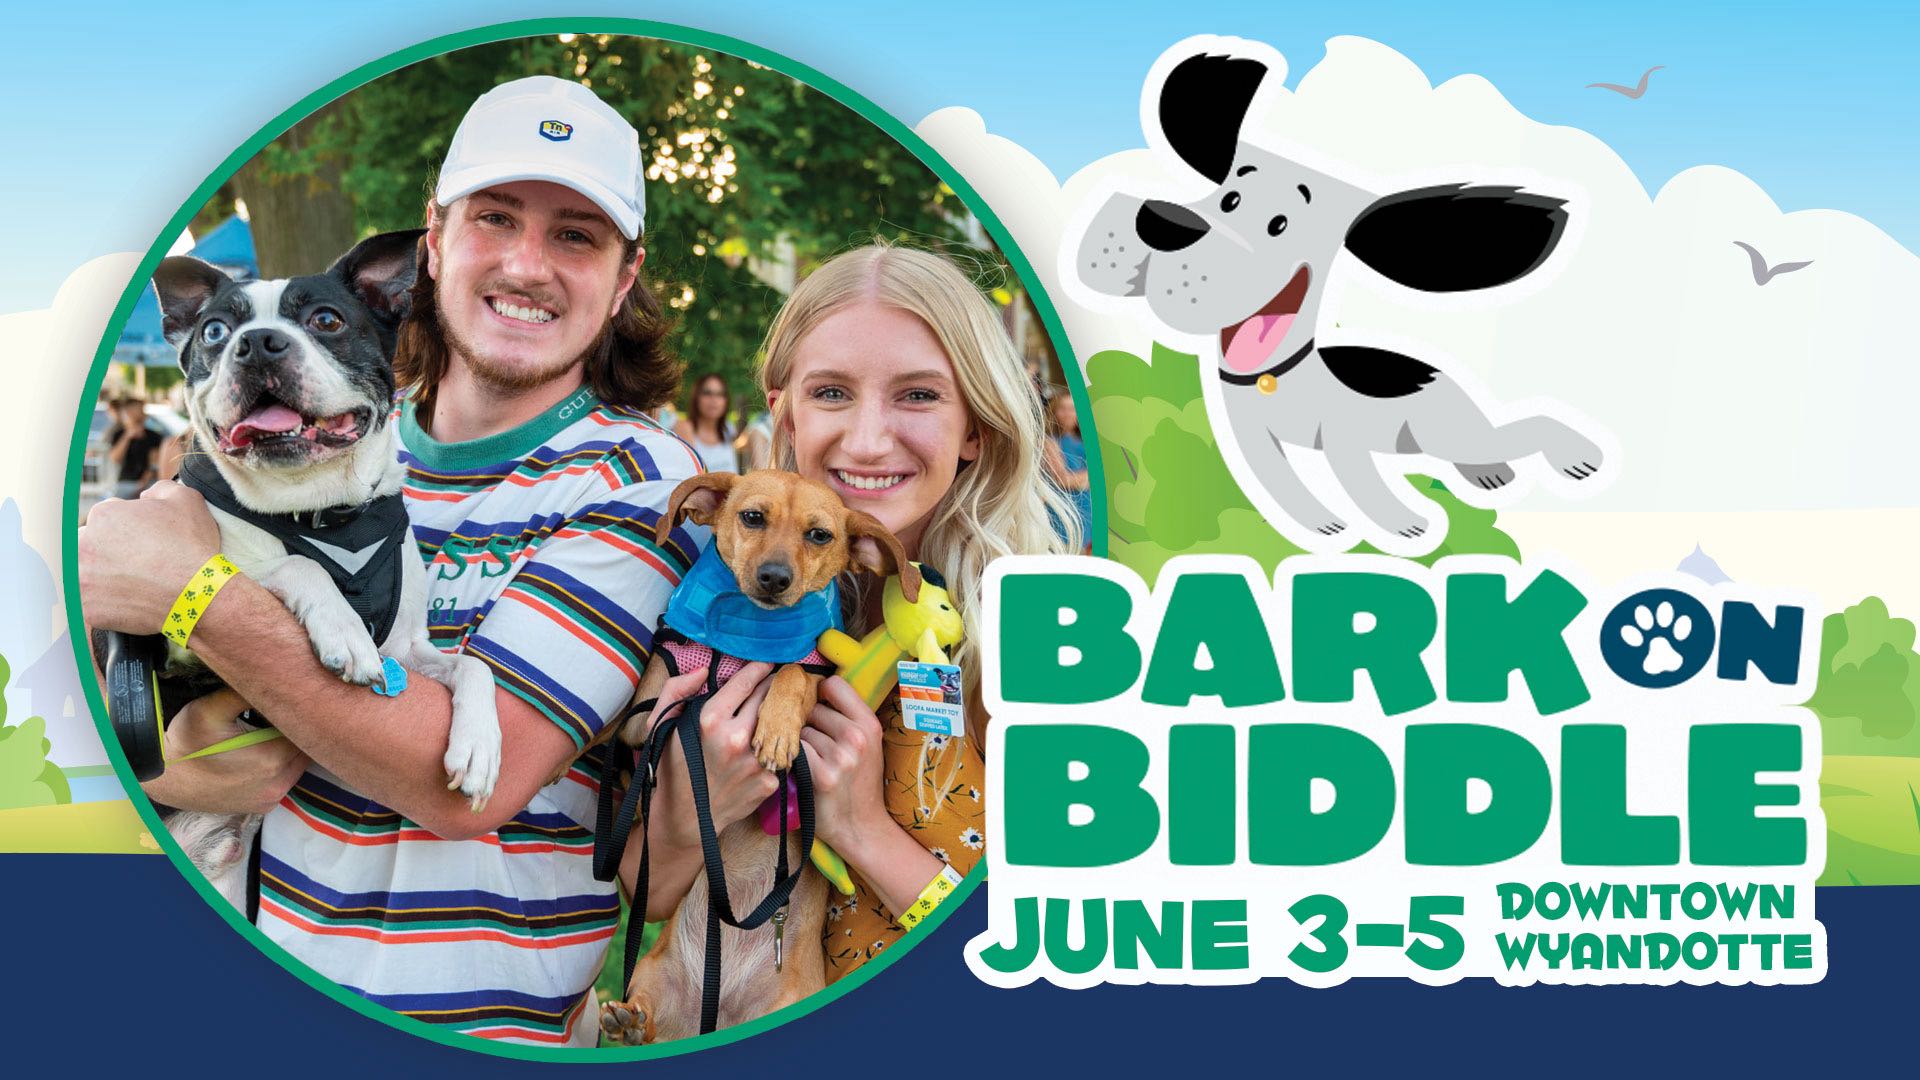 Bark on Biddle June 3 - 5, Downtown Wyandotte; smiling woman and man holding their dogs